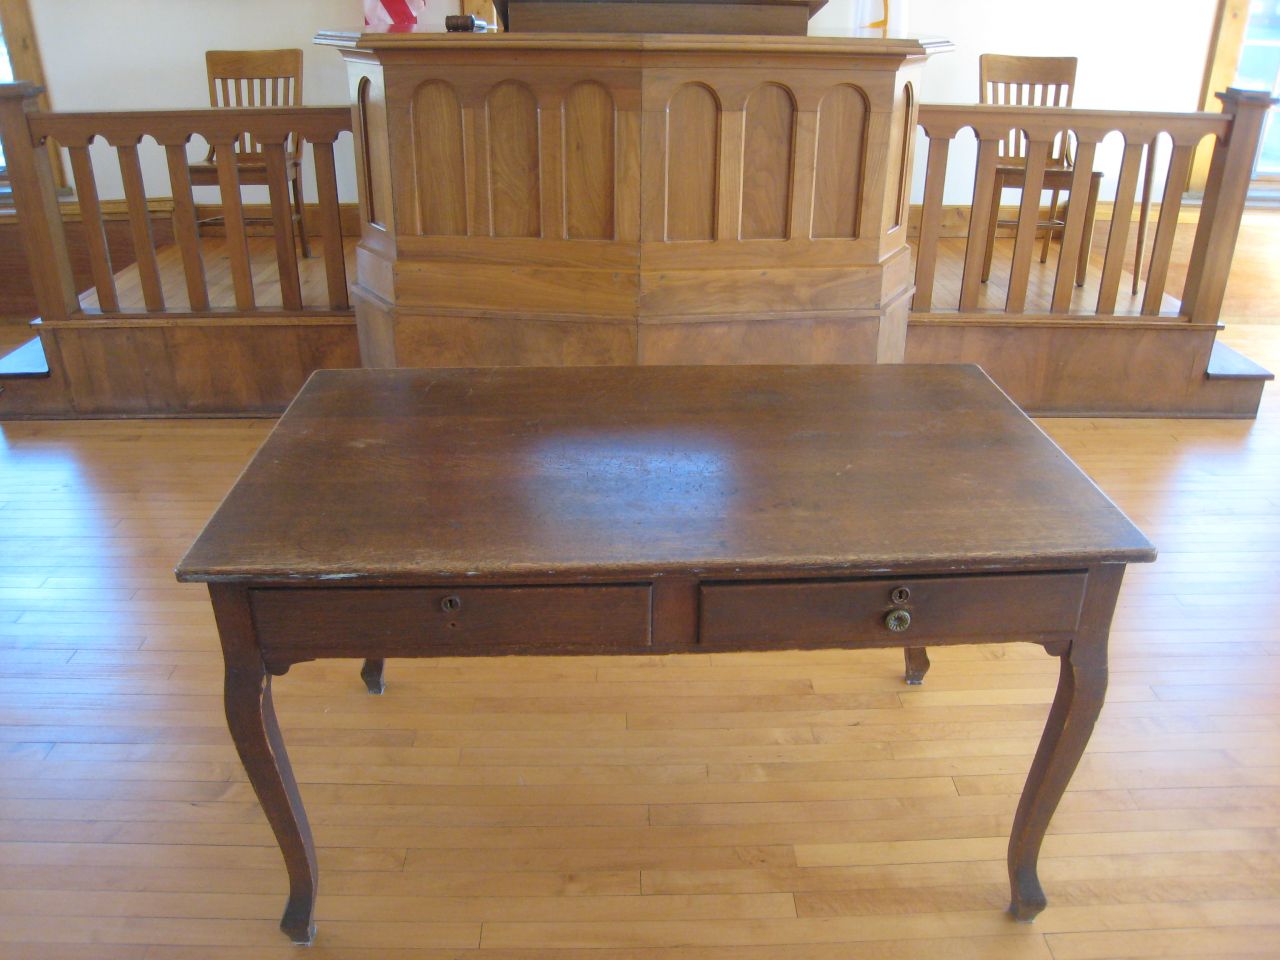 "Lincoln table" is only piece of furniture left from Armstrong case